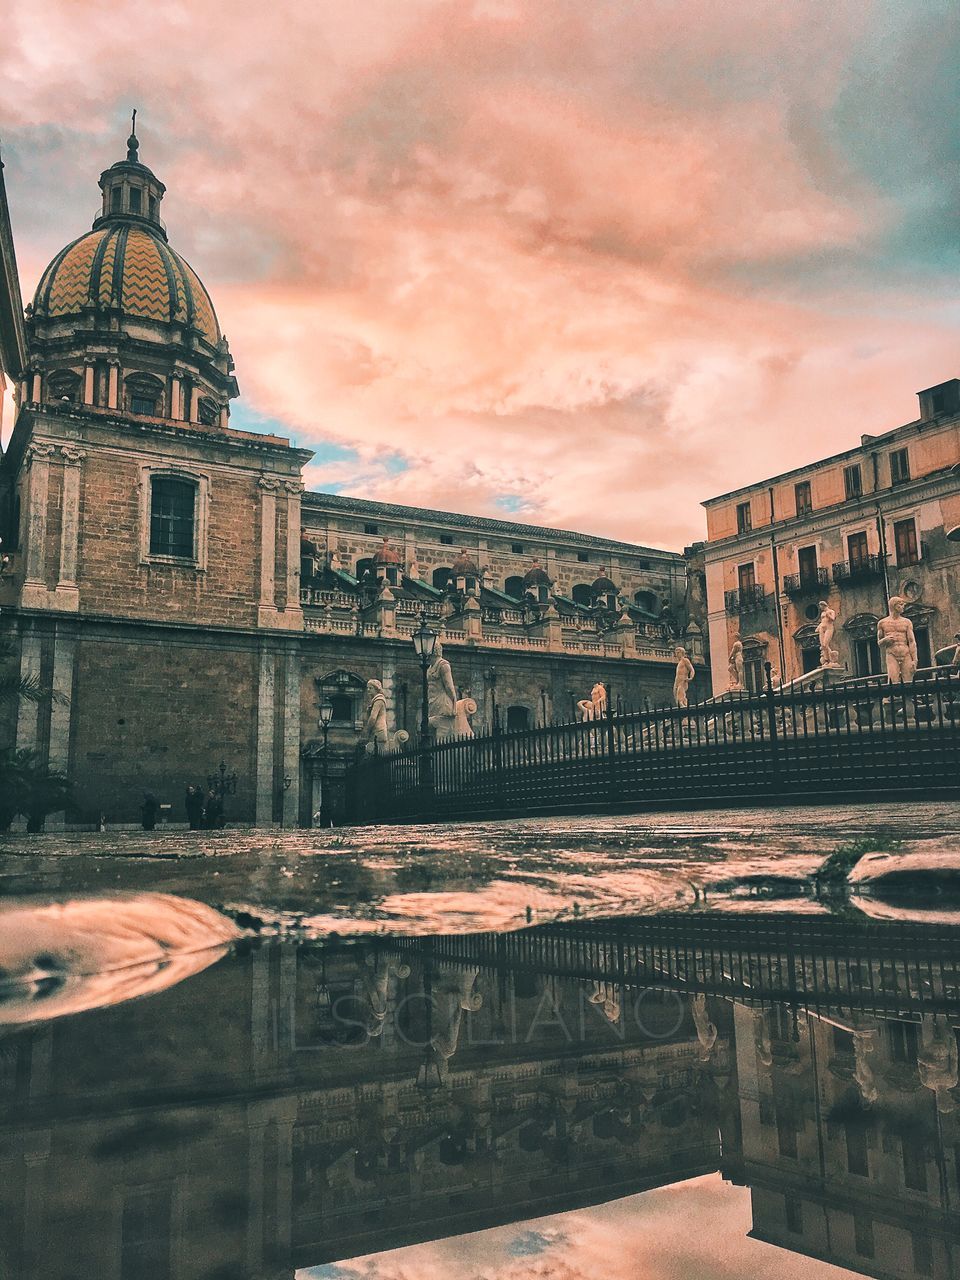 architecture, building exterior, built structure, reflection, water, sky, cloud - sky, building, sunset, place of worship, belief, nature, city, religion, dome, the past, travel destinations, spirituality, no people, outdoors, canal